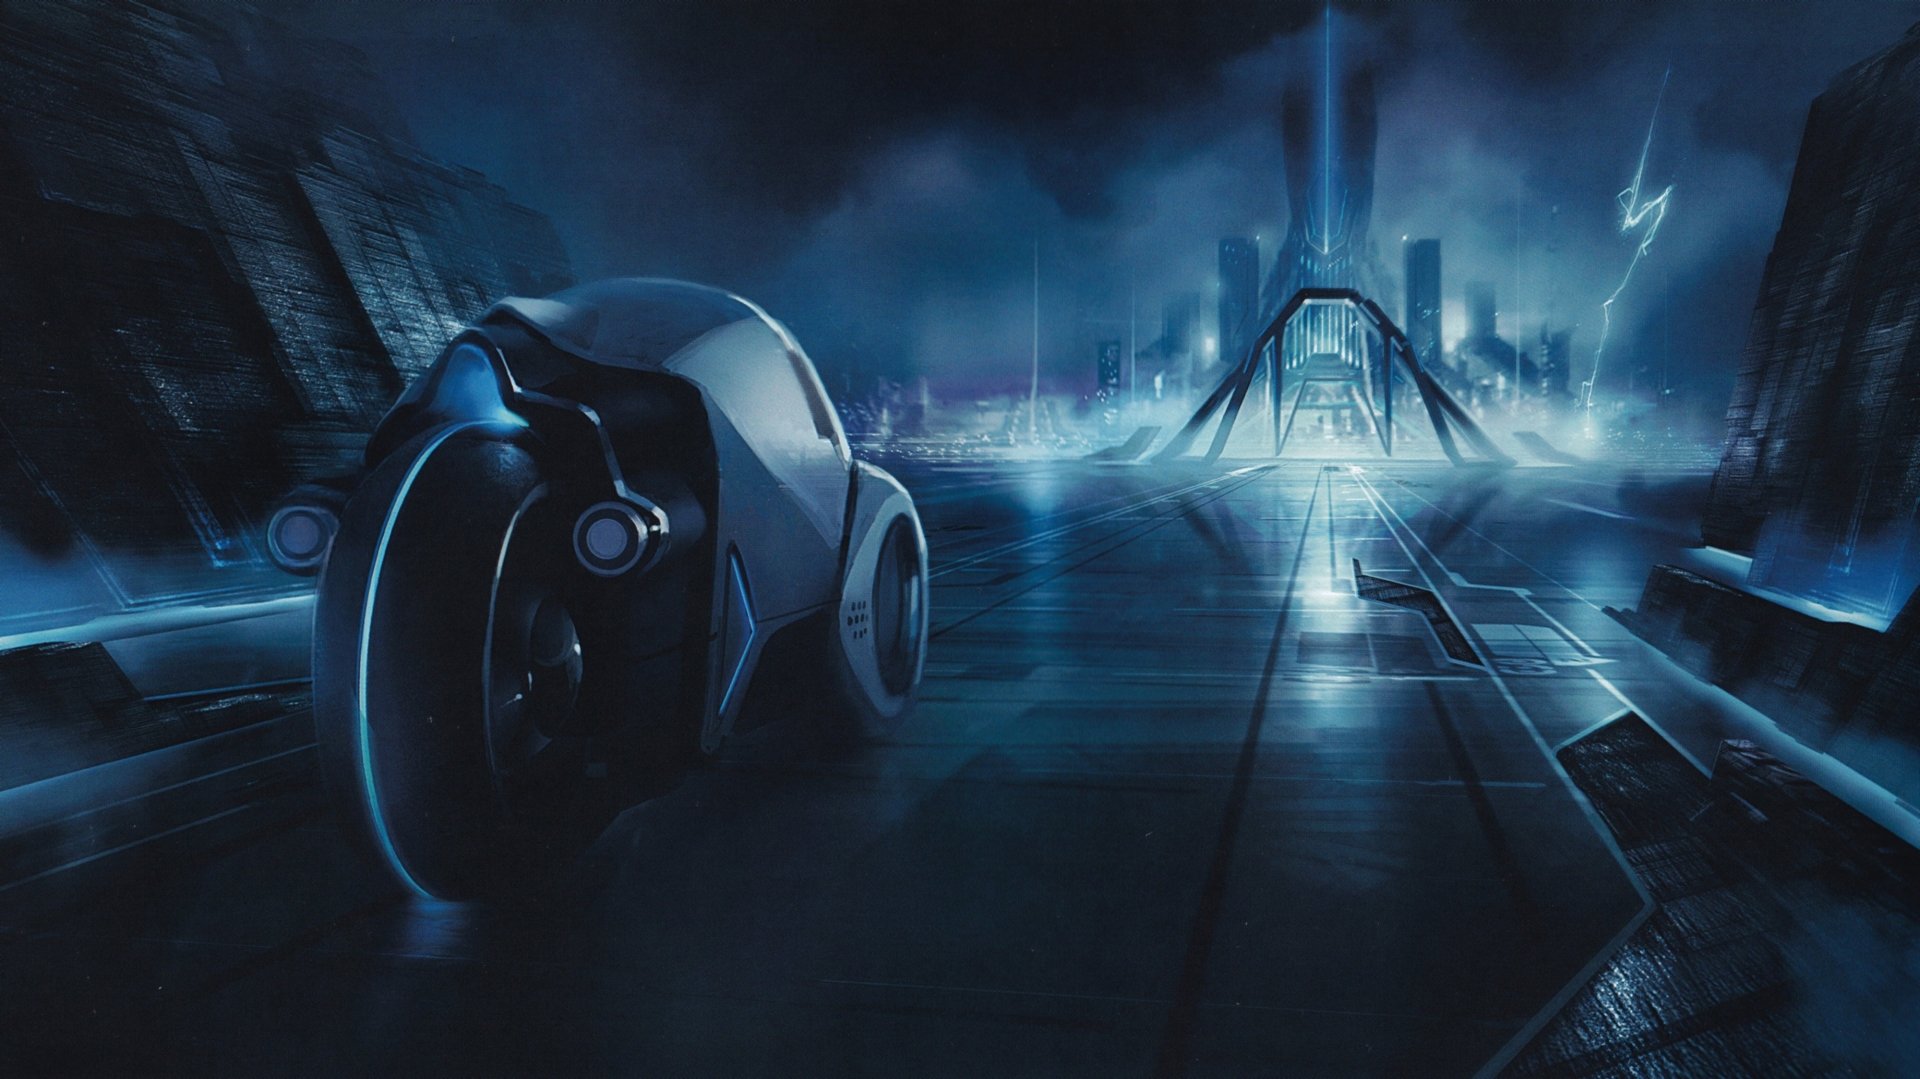 Tron legacy hd papers and backgrounds